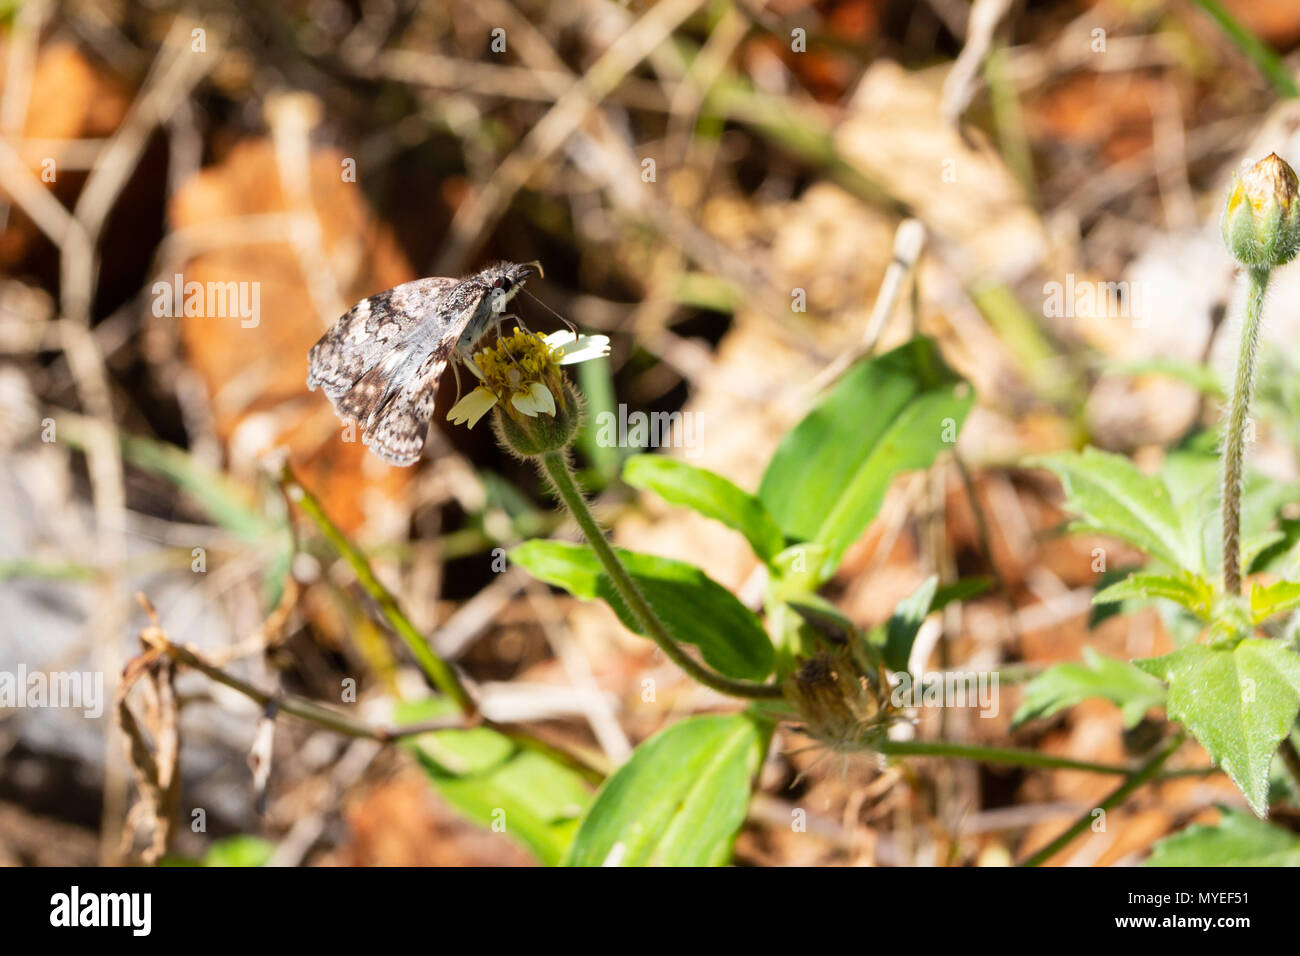 Asuncion, Paraguay. 7th Jun, 2018. A white-patched skipper or white patch (Chiomara asychis) butterfly feeds the nectar of tridax daisy or coatbuttons (Tridax procumbens) blooming flower during a sunny and pleasant afternoon with temperatures high around 19°C in Asuncion, Paraguay. Credit: Andre M. Chang/ARDUOPRESS/Alamy Live News Stock Photo